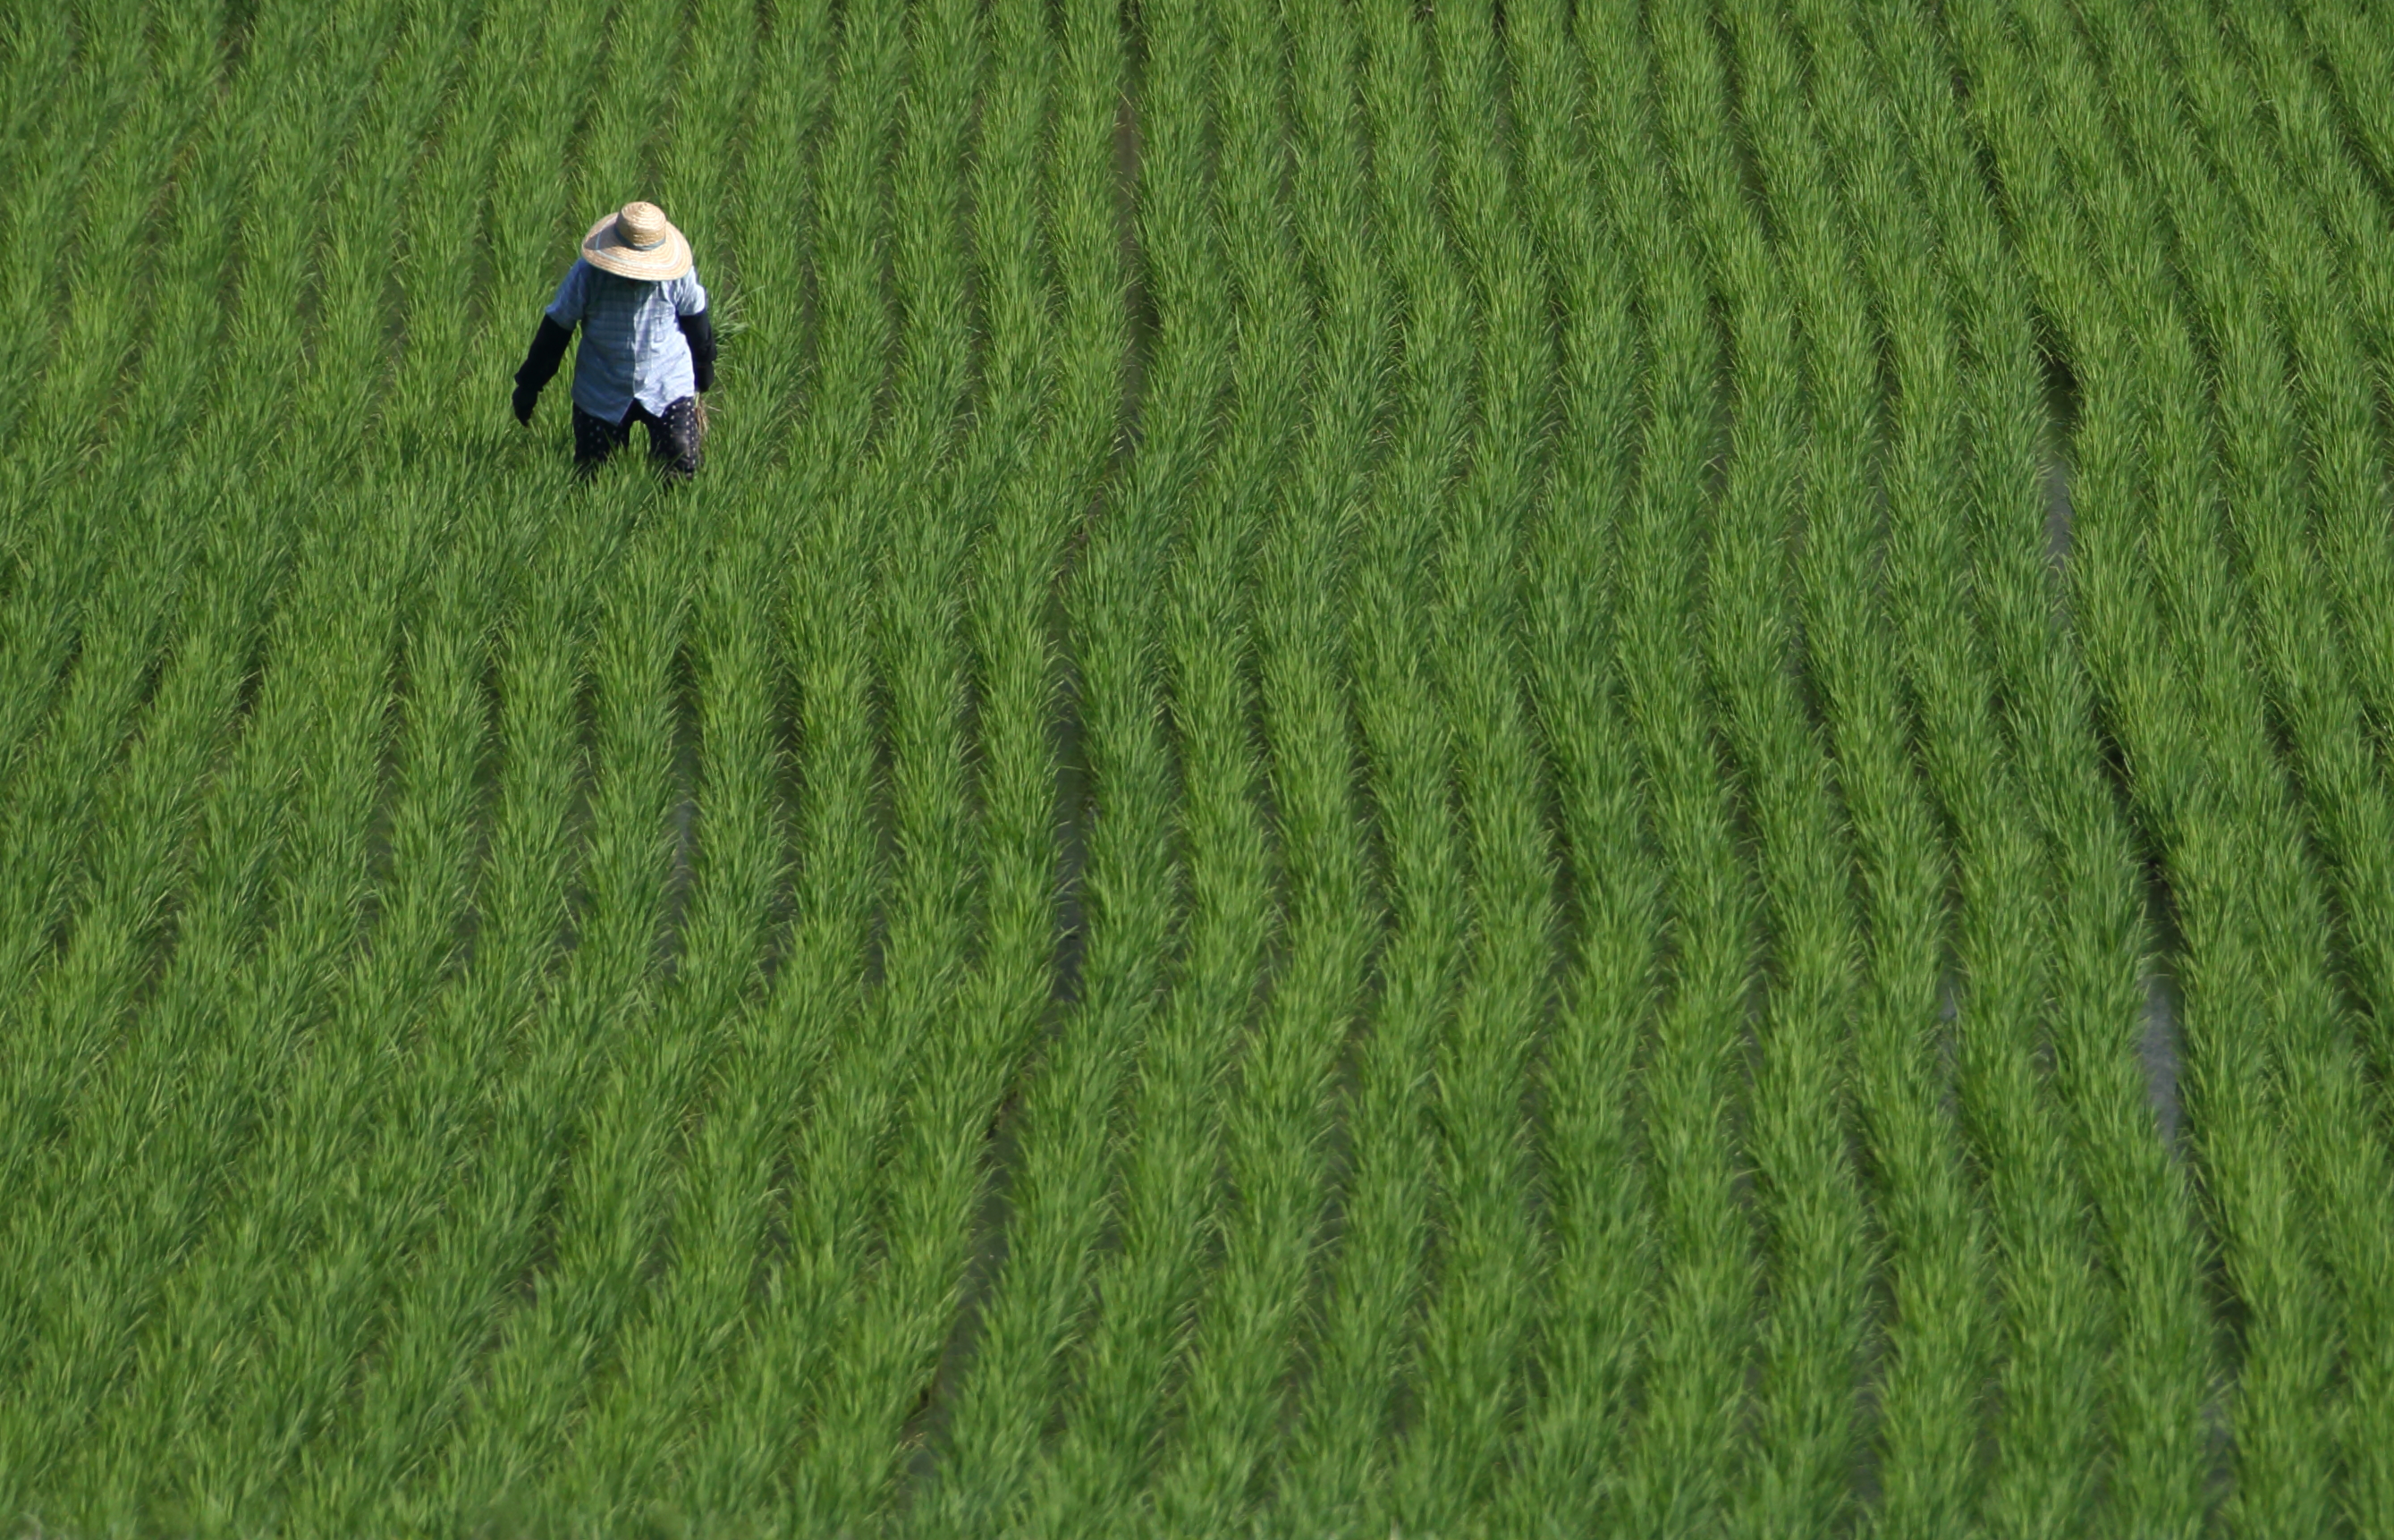 A rice farmer works in a paddy field in Yabu City, Hyogo Prefecture, Japan, on Wednesday, June 25, 2014. (Bloomberg—Bloomberg via Getty Images)